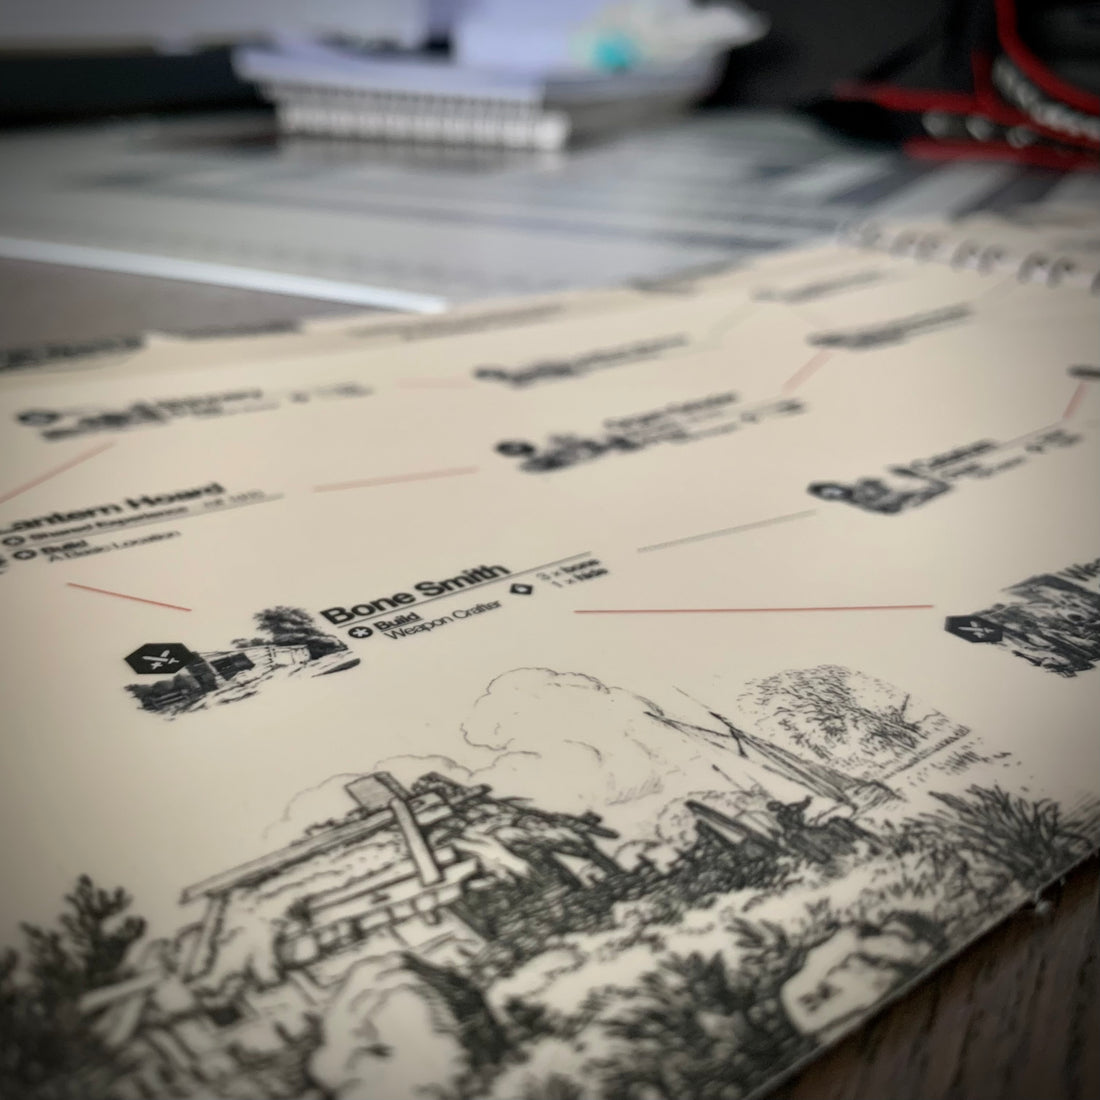 Further playtesting with upcoming Hobo's Deluxe Settlement Book™ for Kingdom Death